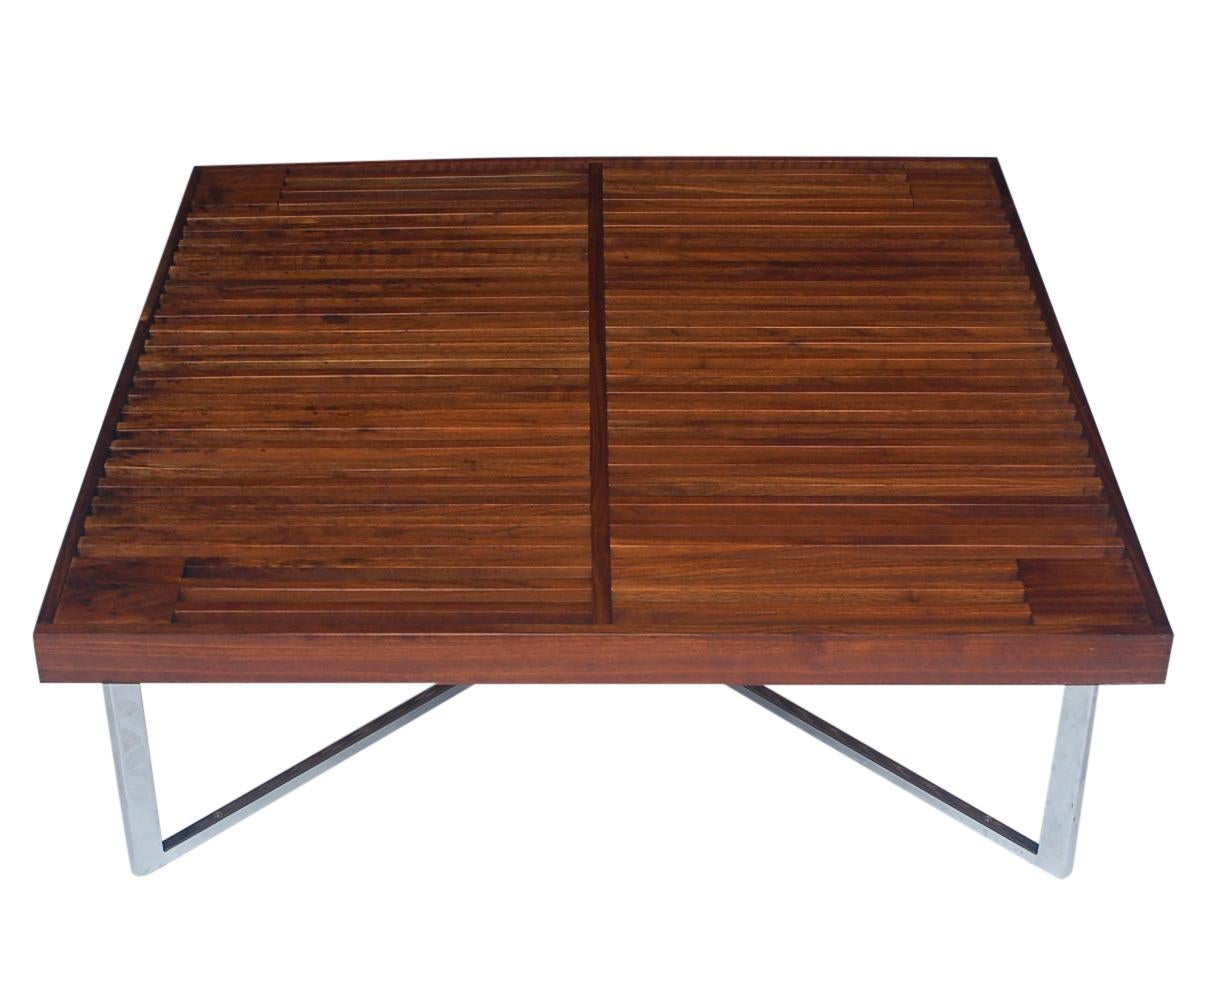 Mid-Century Modern Square Slat Wood Cocktail Table with X-Base after Nelson In Good Condition For Sale In Philadelphia, PA